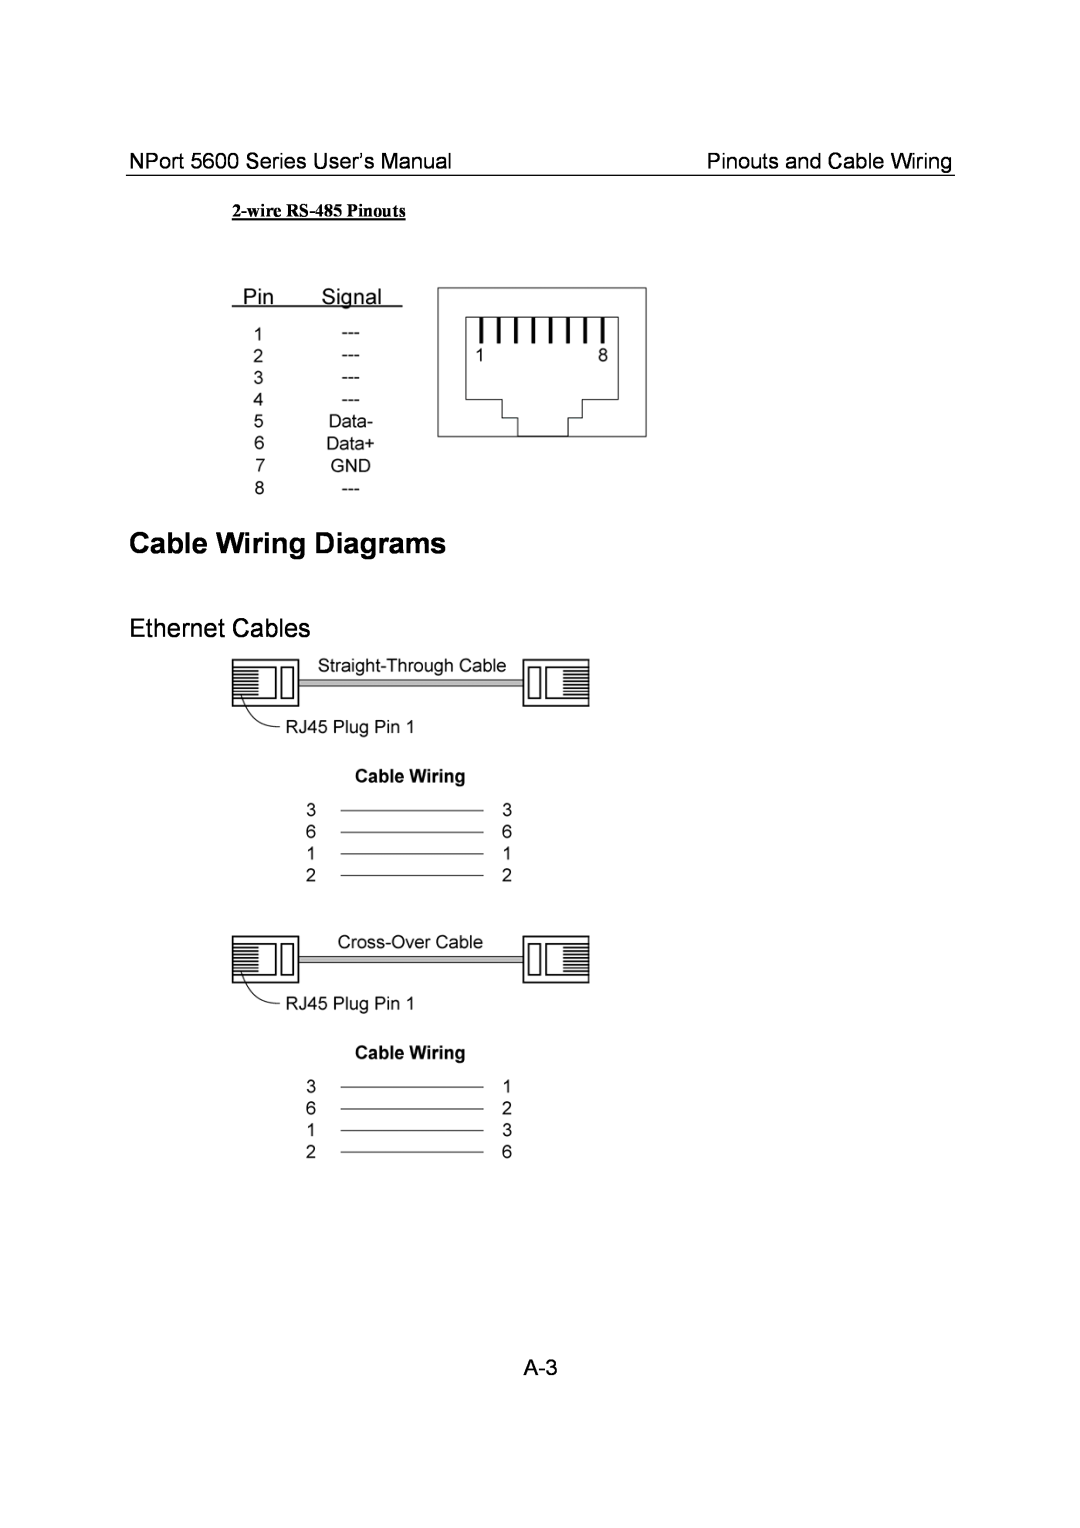 Moxa Technologies Cable Wiring Diagrams, Ethernet Cables, NPort 5600 Series User’s Manual, Pinouts and Cable Wiring 